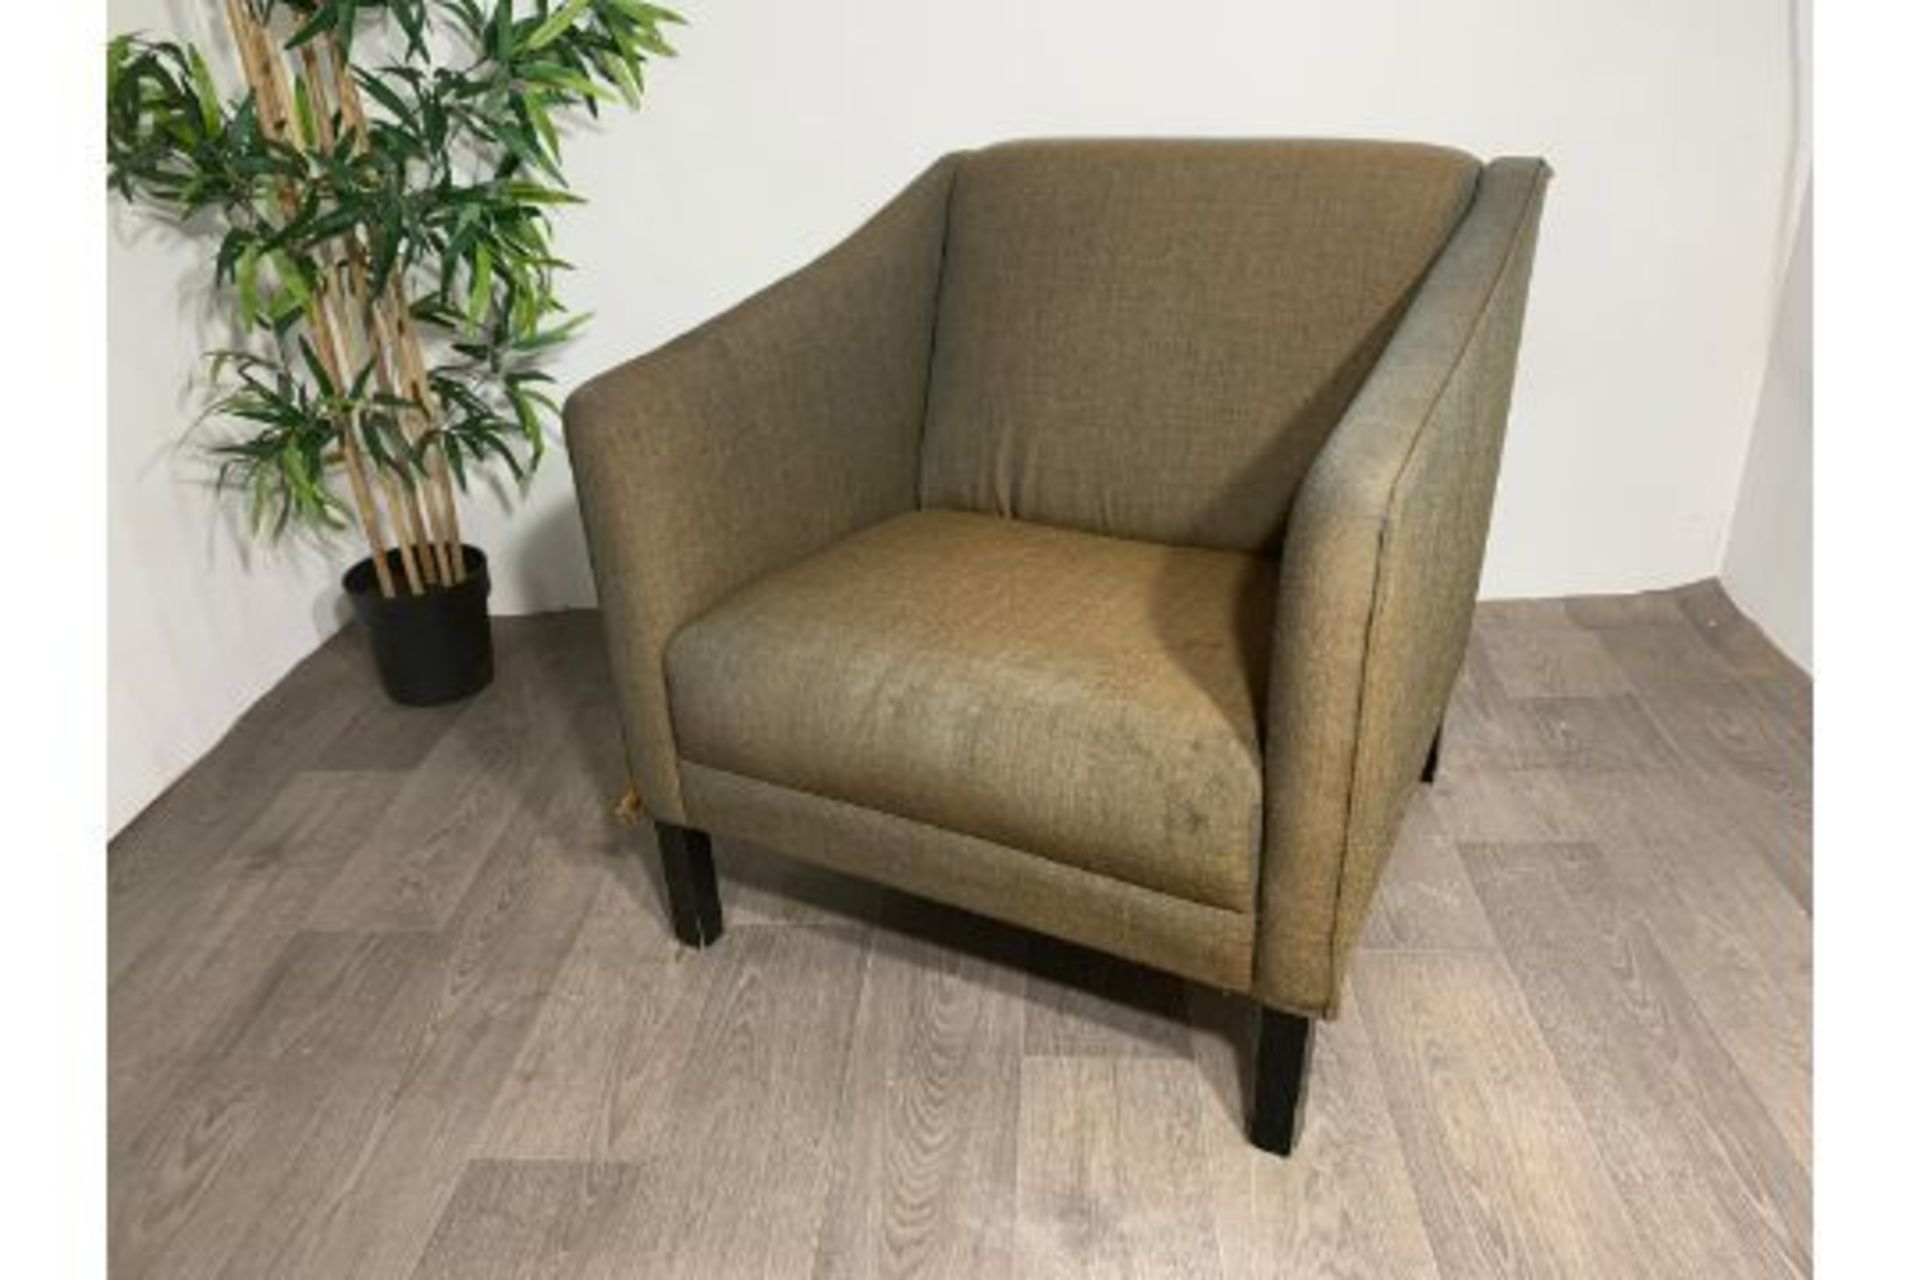 Commercial Grade Brown Armchair - Image 2 of 4